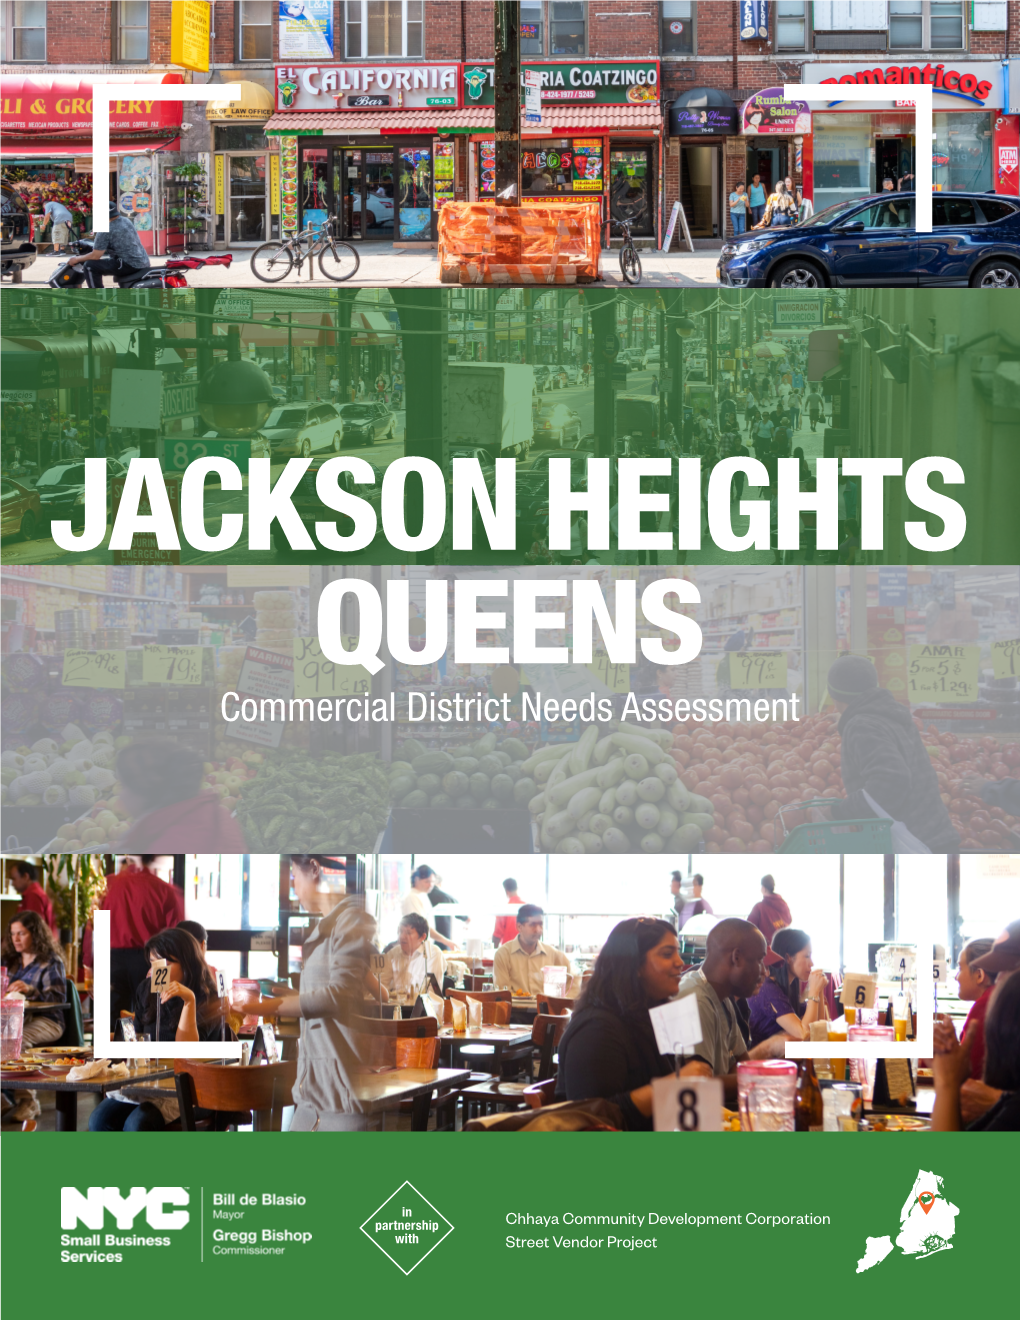 JACKSON HEIGHTS QUEENS Commercial District Needs Assessment